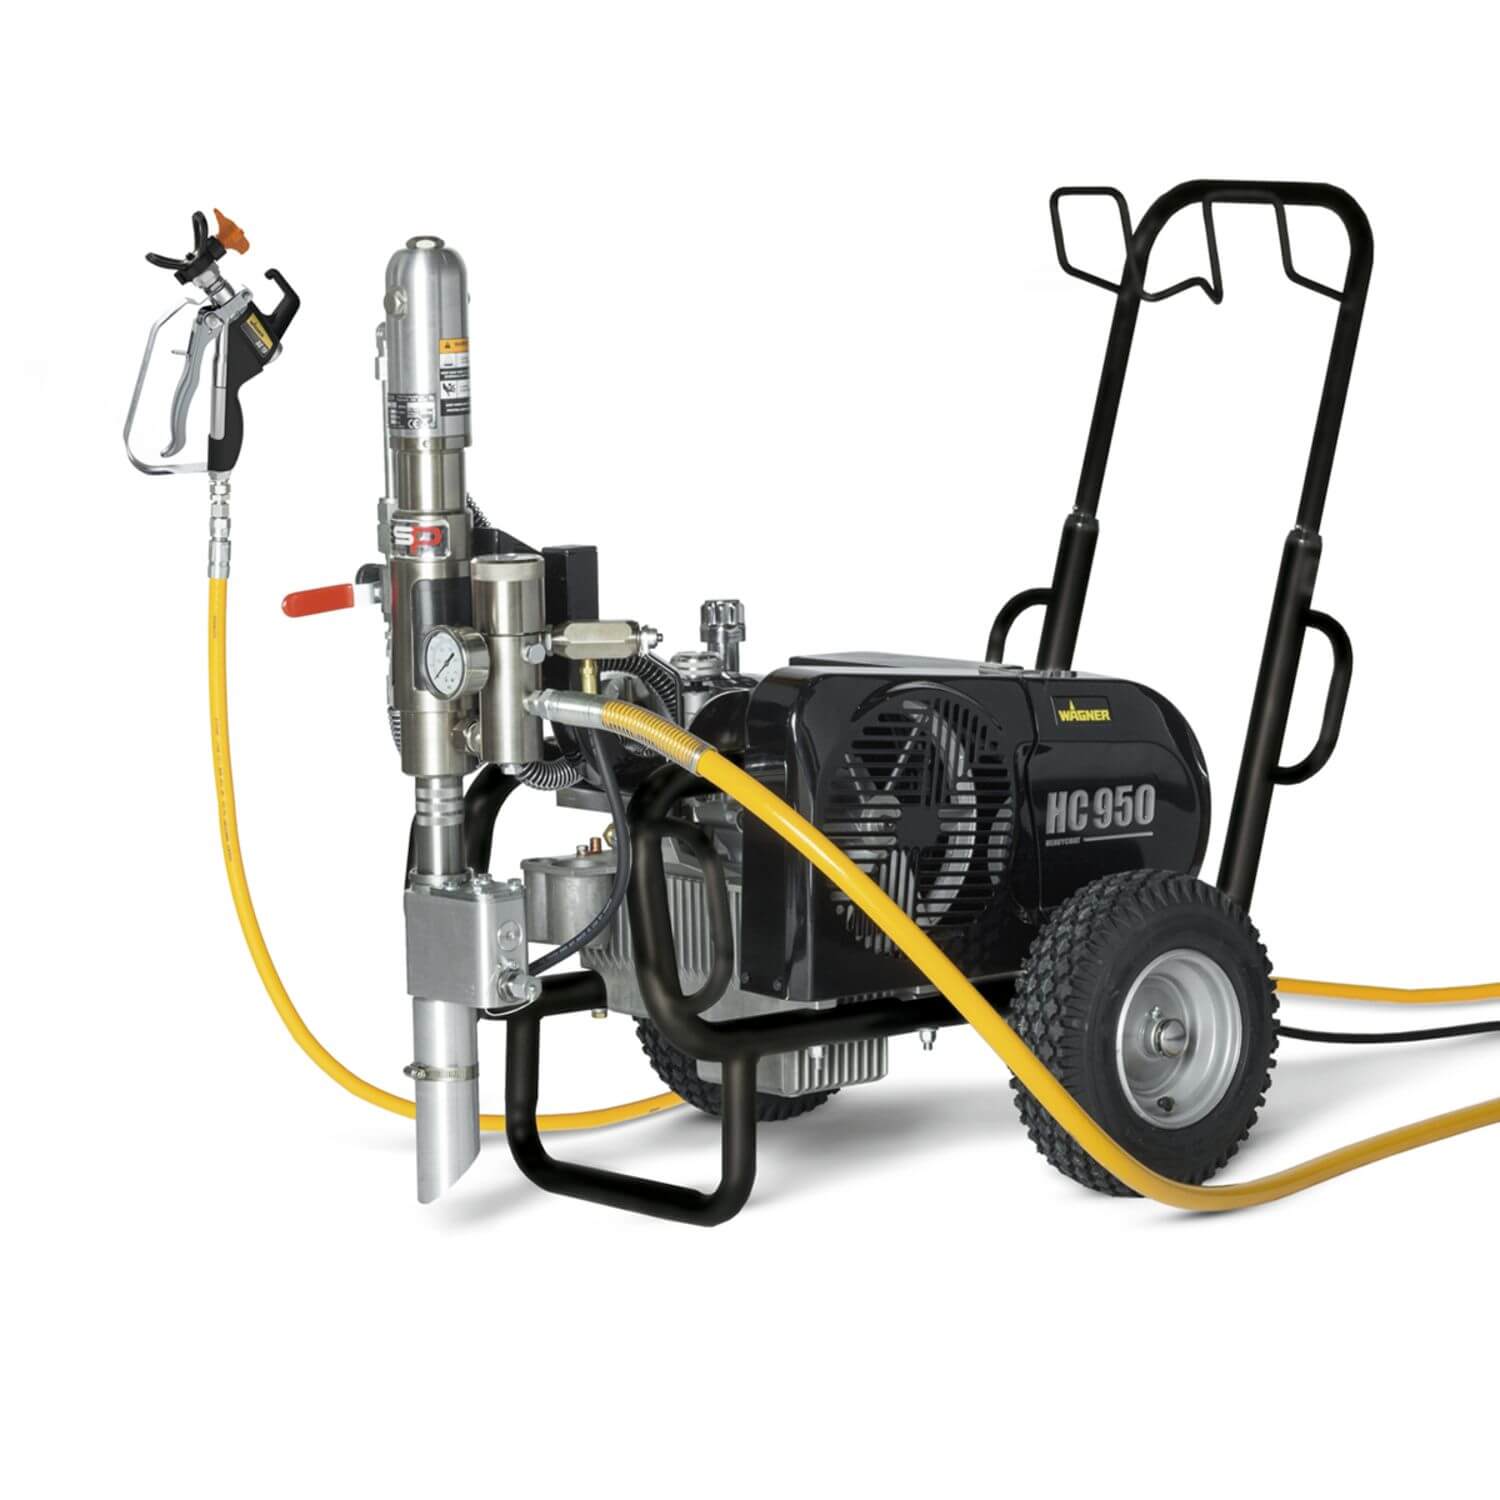 WAGNER Pompa airless HeavyCoat 950 E SSP Spraypack, debit material 6.6 l/min, duza max. 0,052”, motor electric 3.6 kW